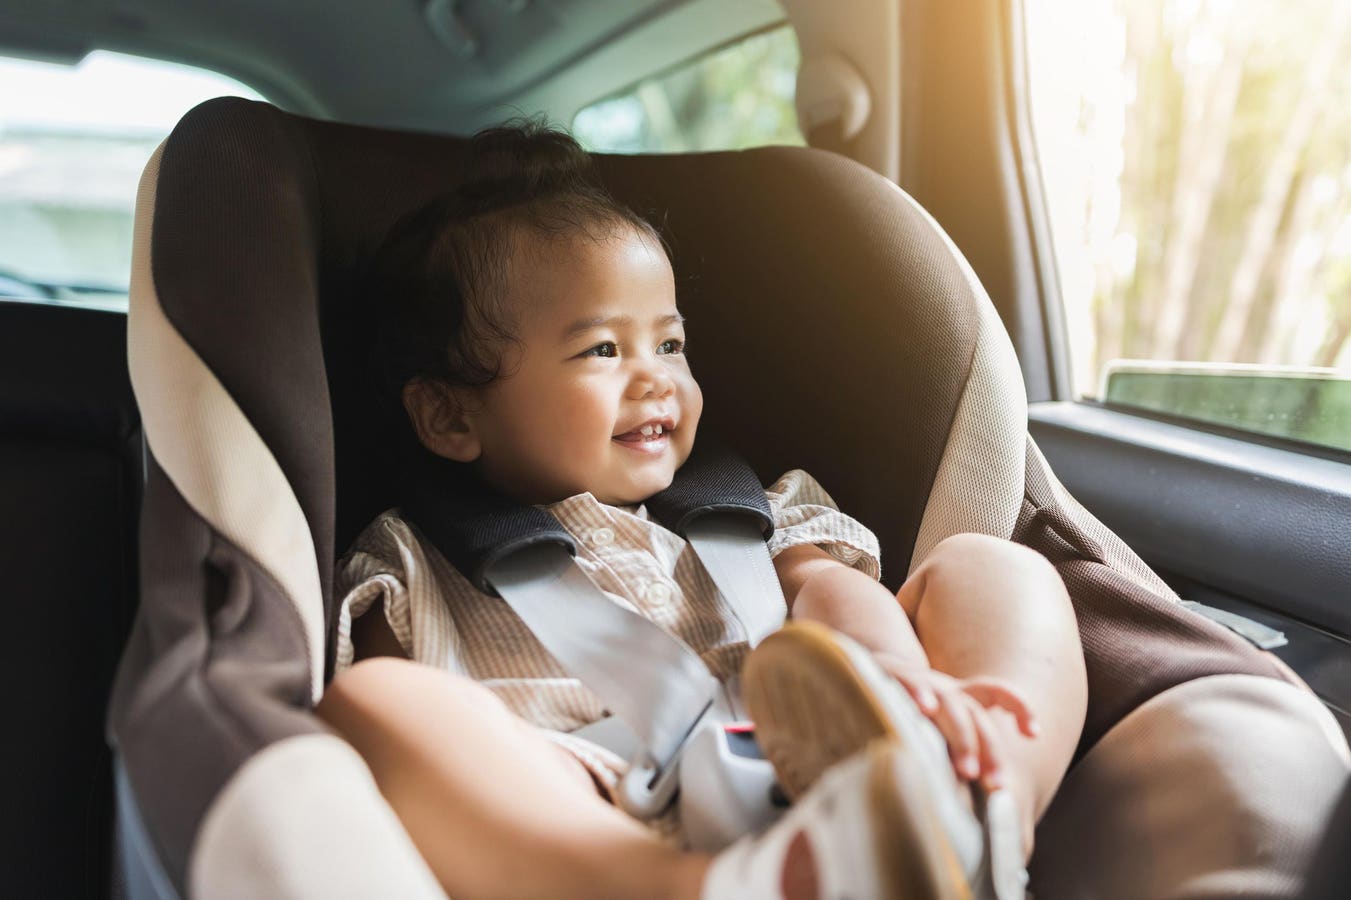 A Neurologist Shares Tips On How To Prevent Hot Car Deaths In Children